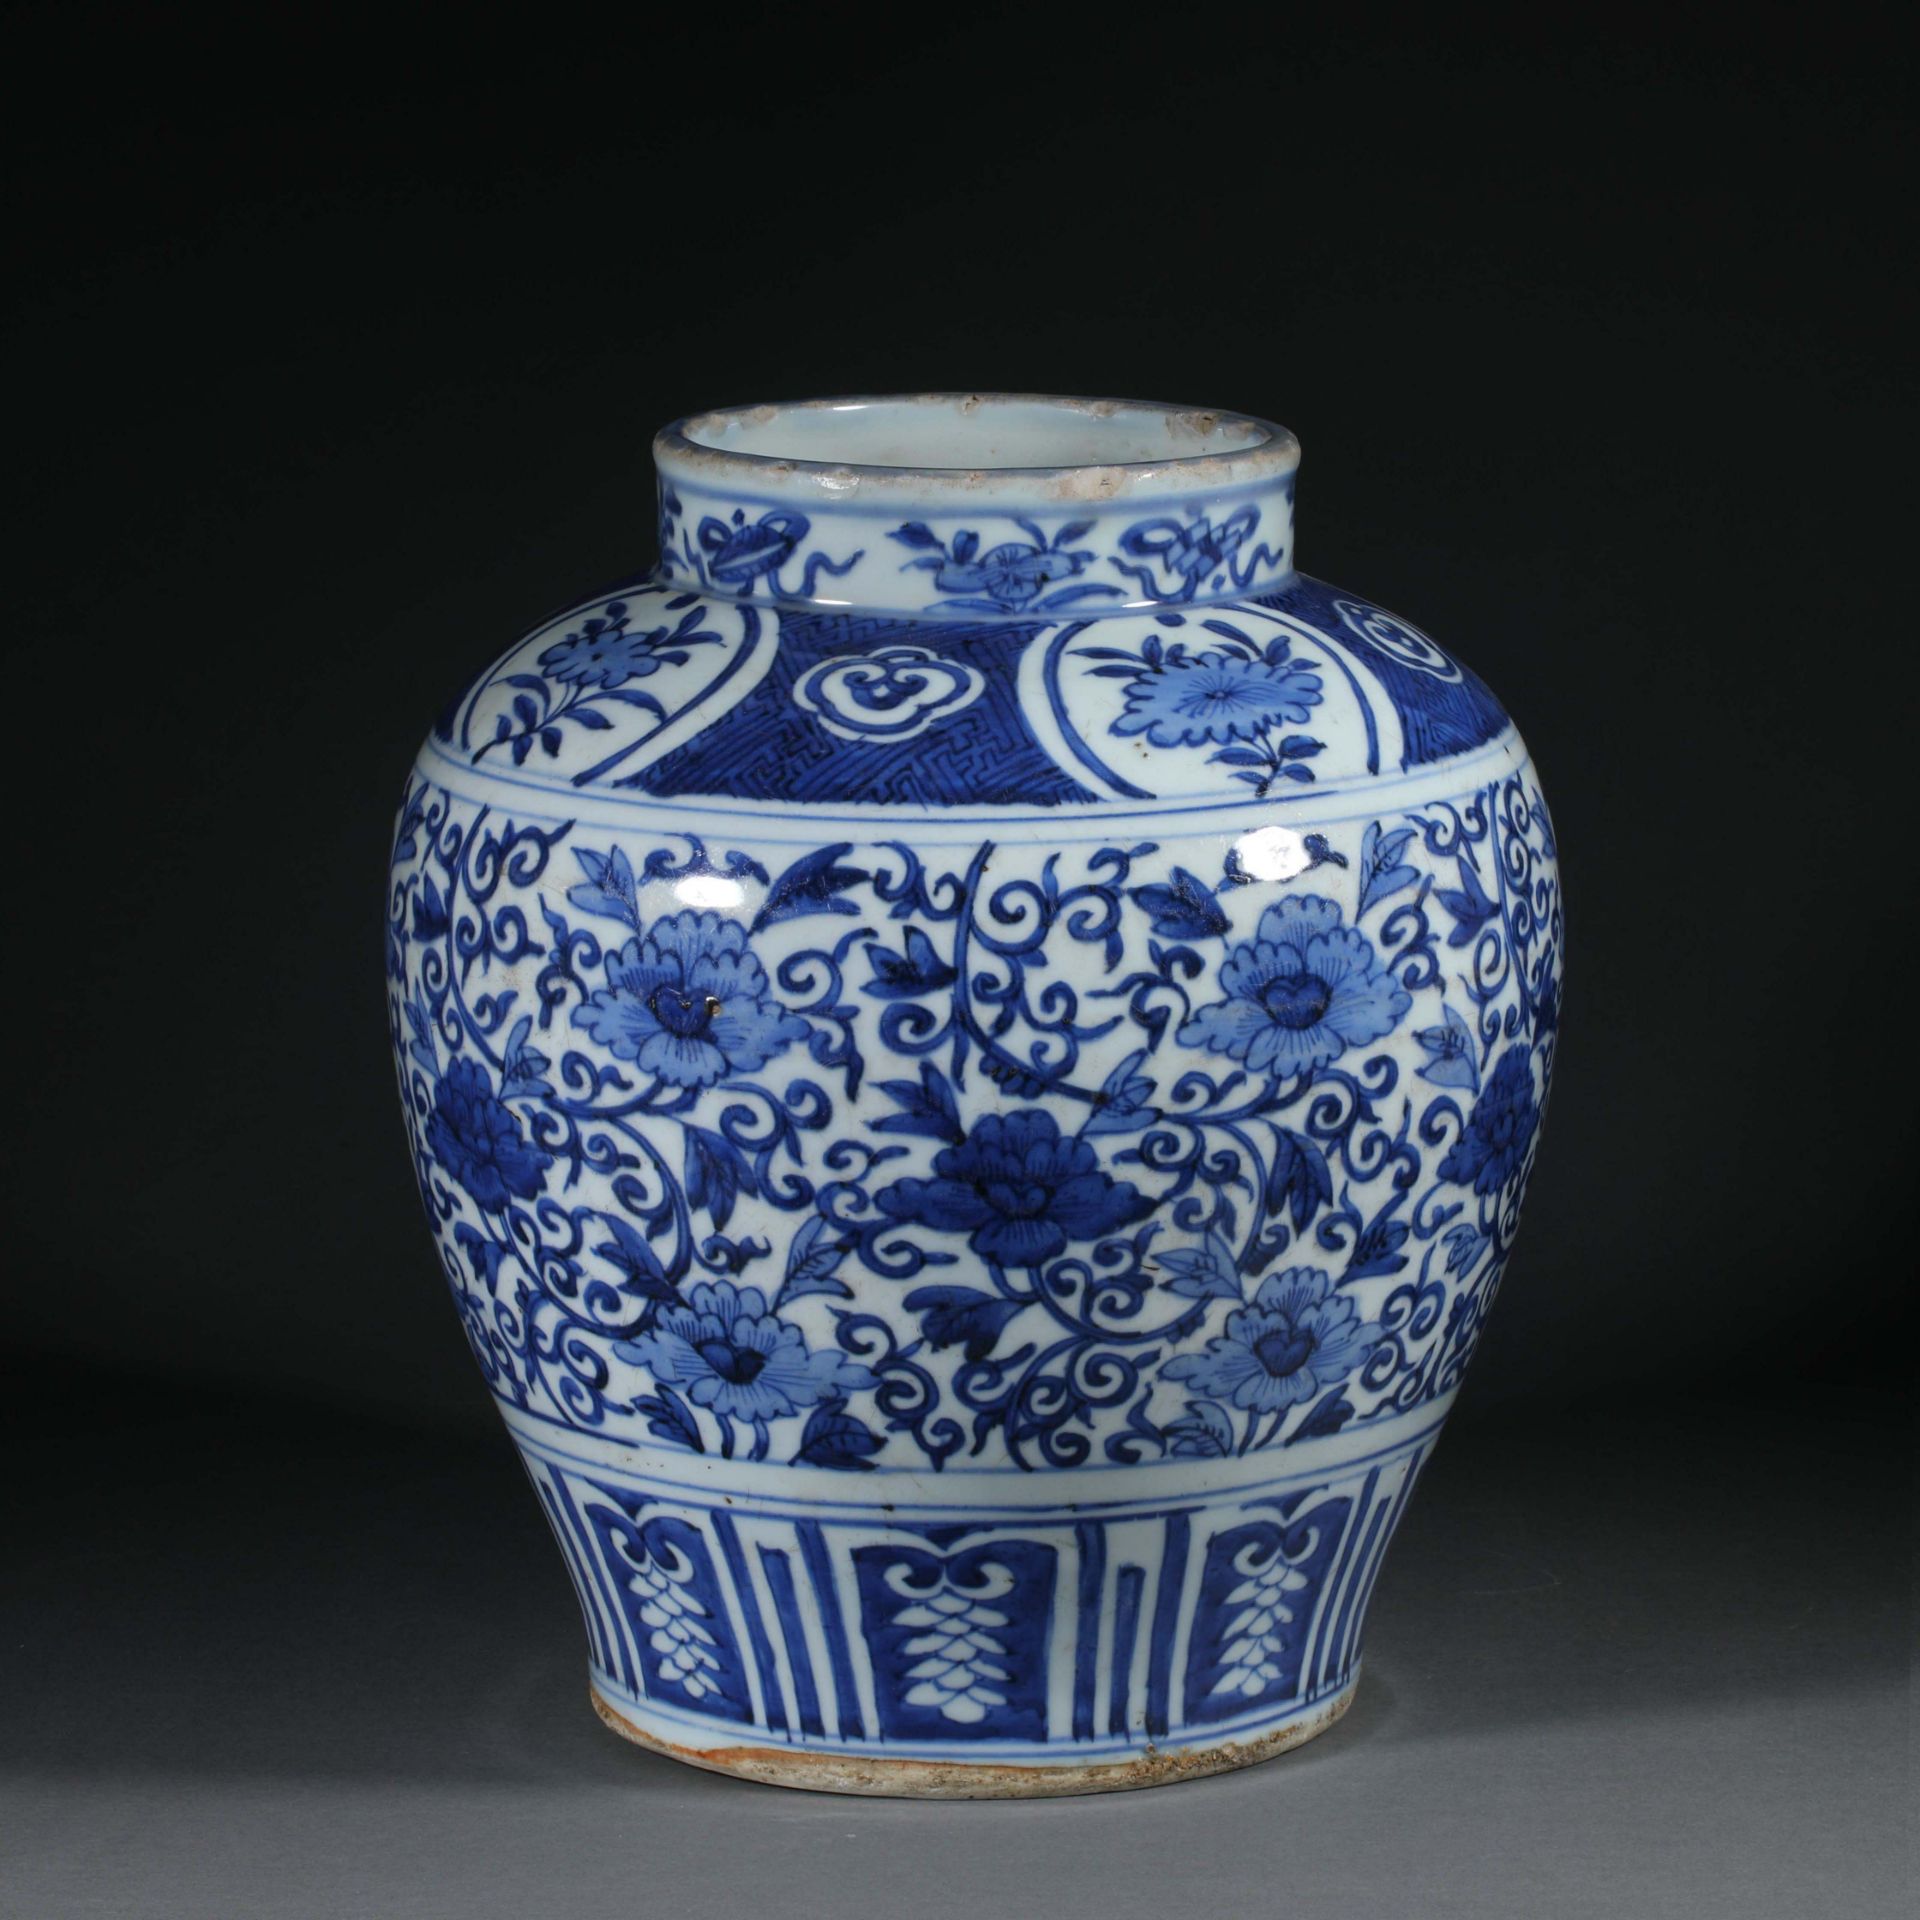 A blue-and-white porcelain painting pot